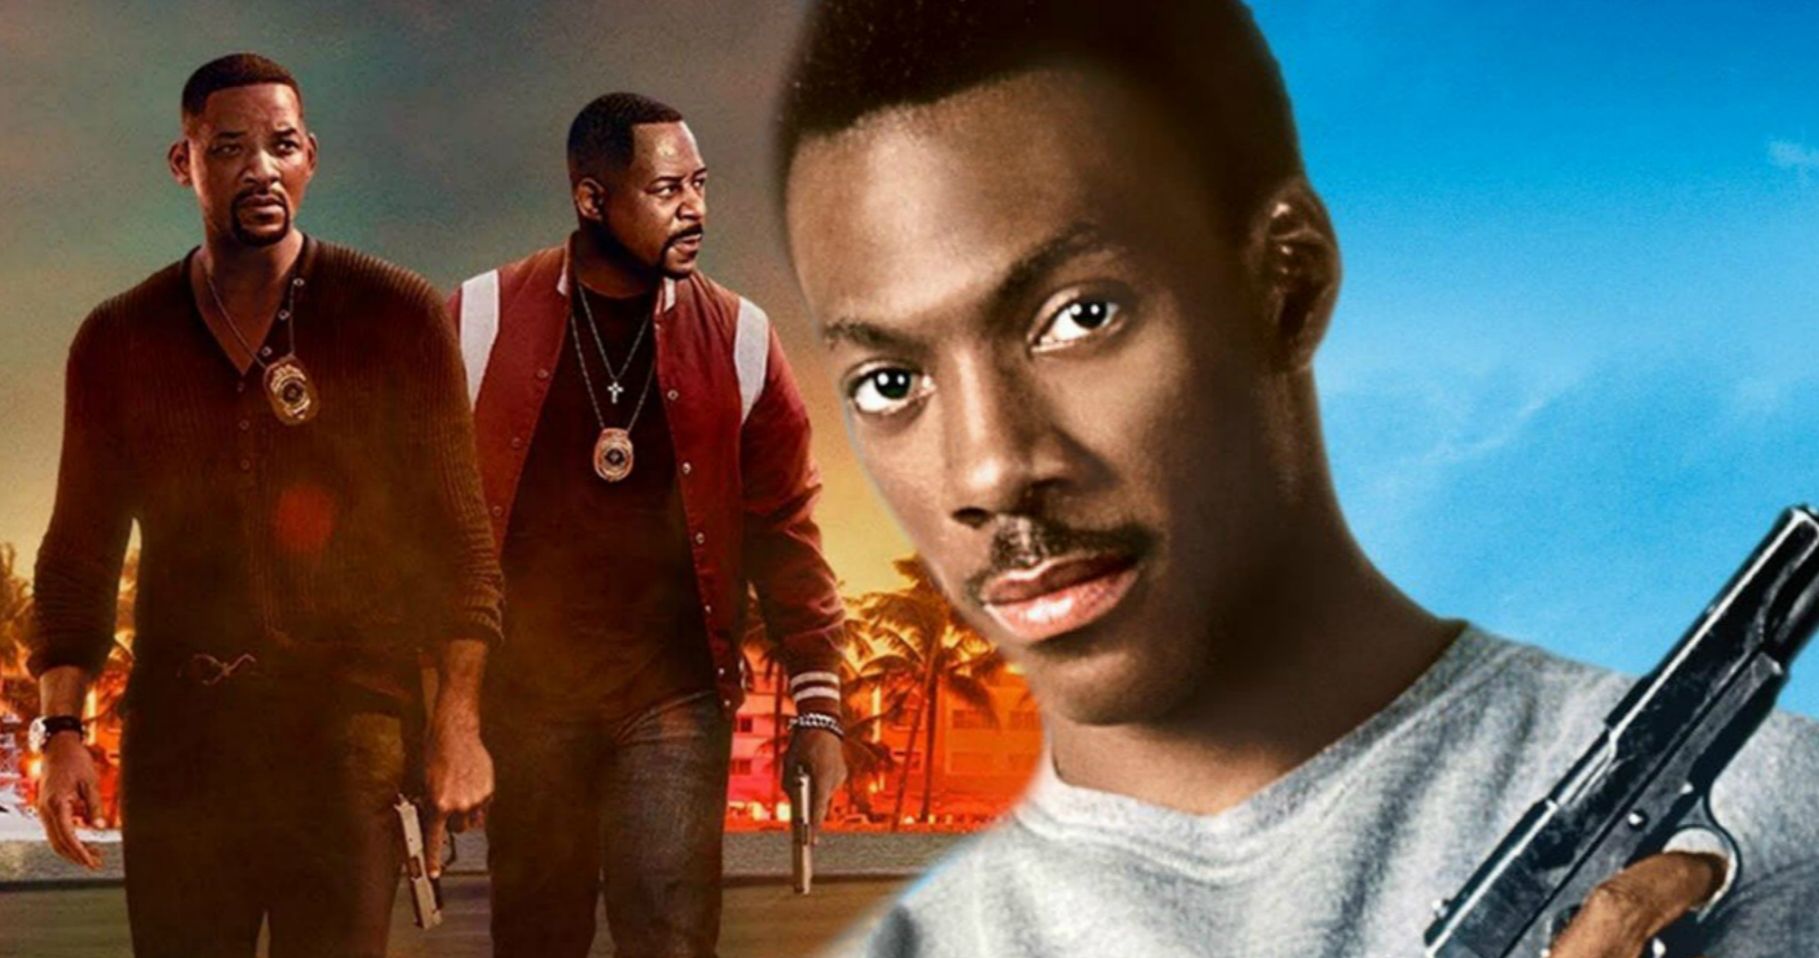 Will Axel Foley Meet the Bad Boys in a Beverly Hills Cop 4 Crossover?